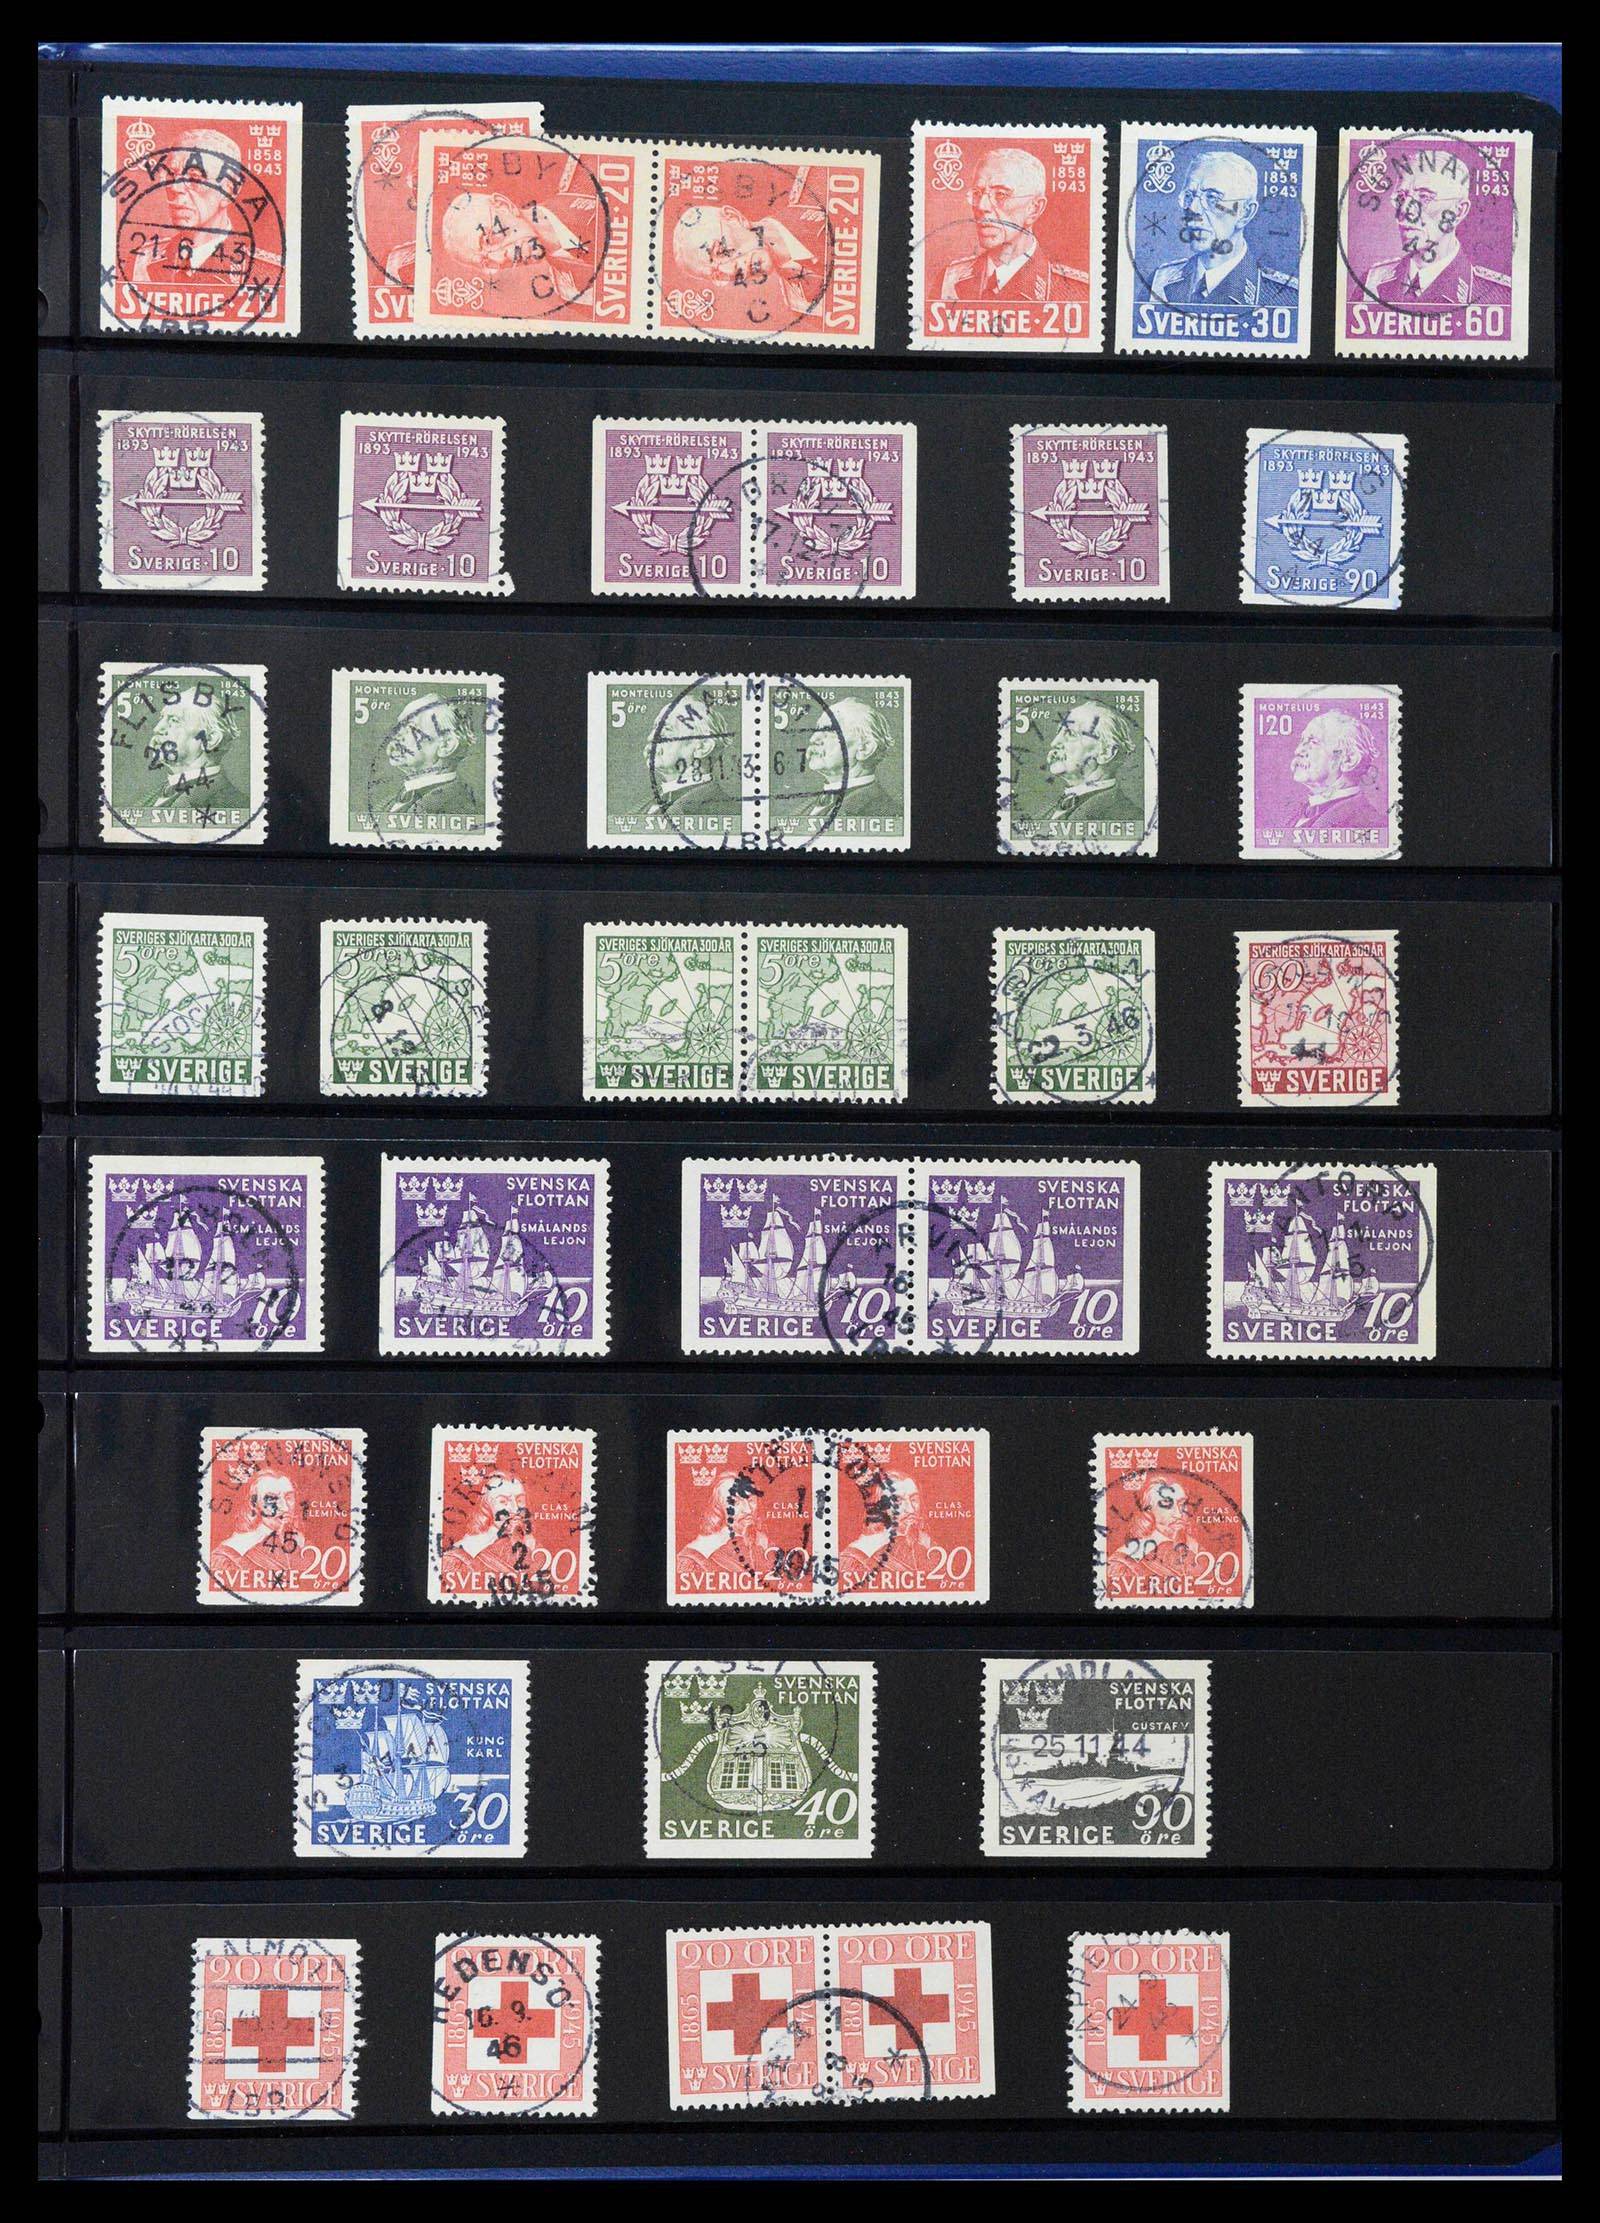 37756 0010 - Stamp collection 37756 Sweden 1858-2002.